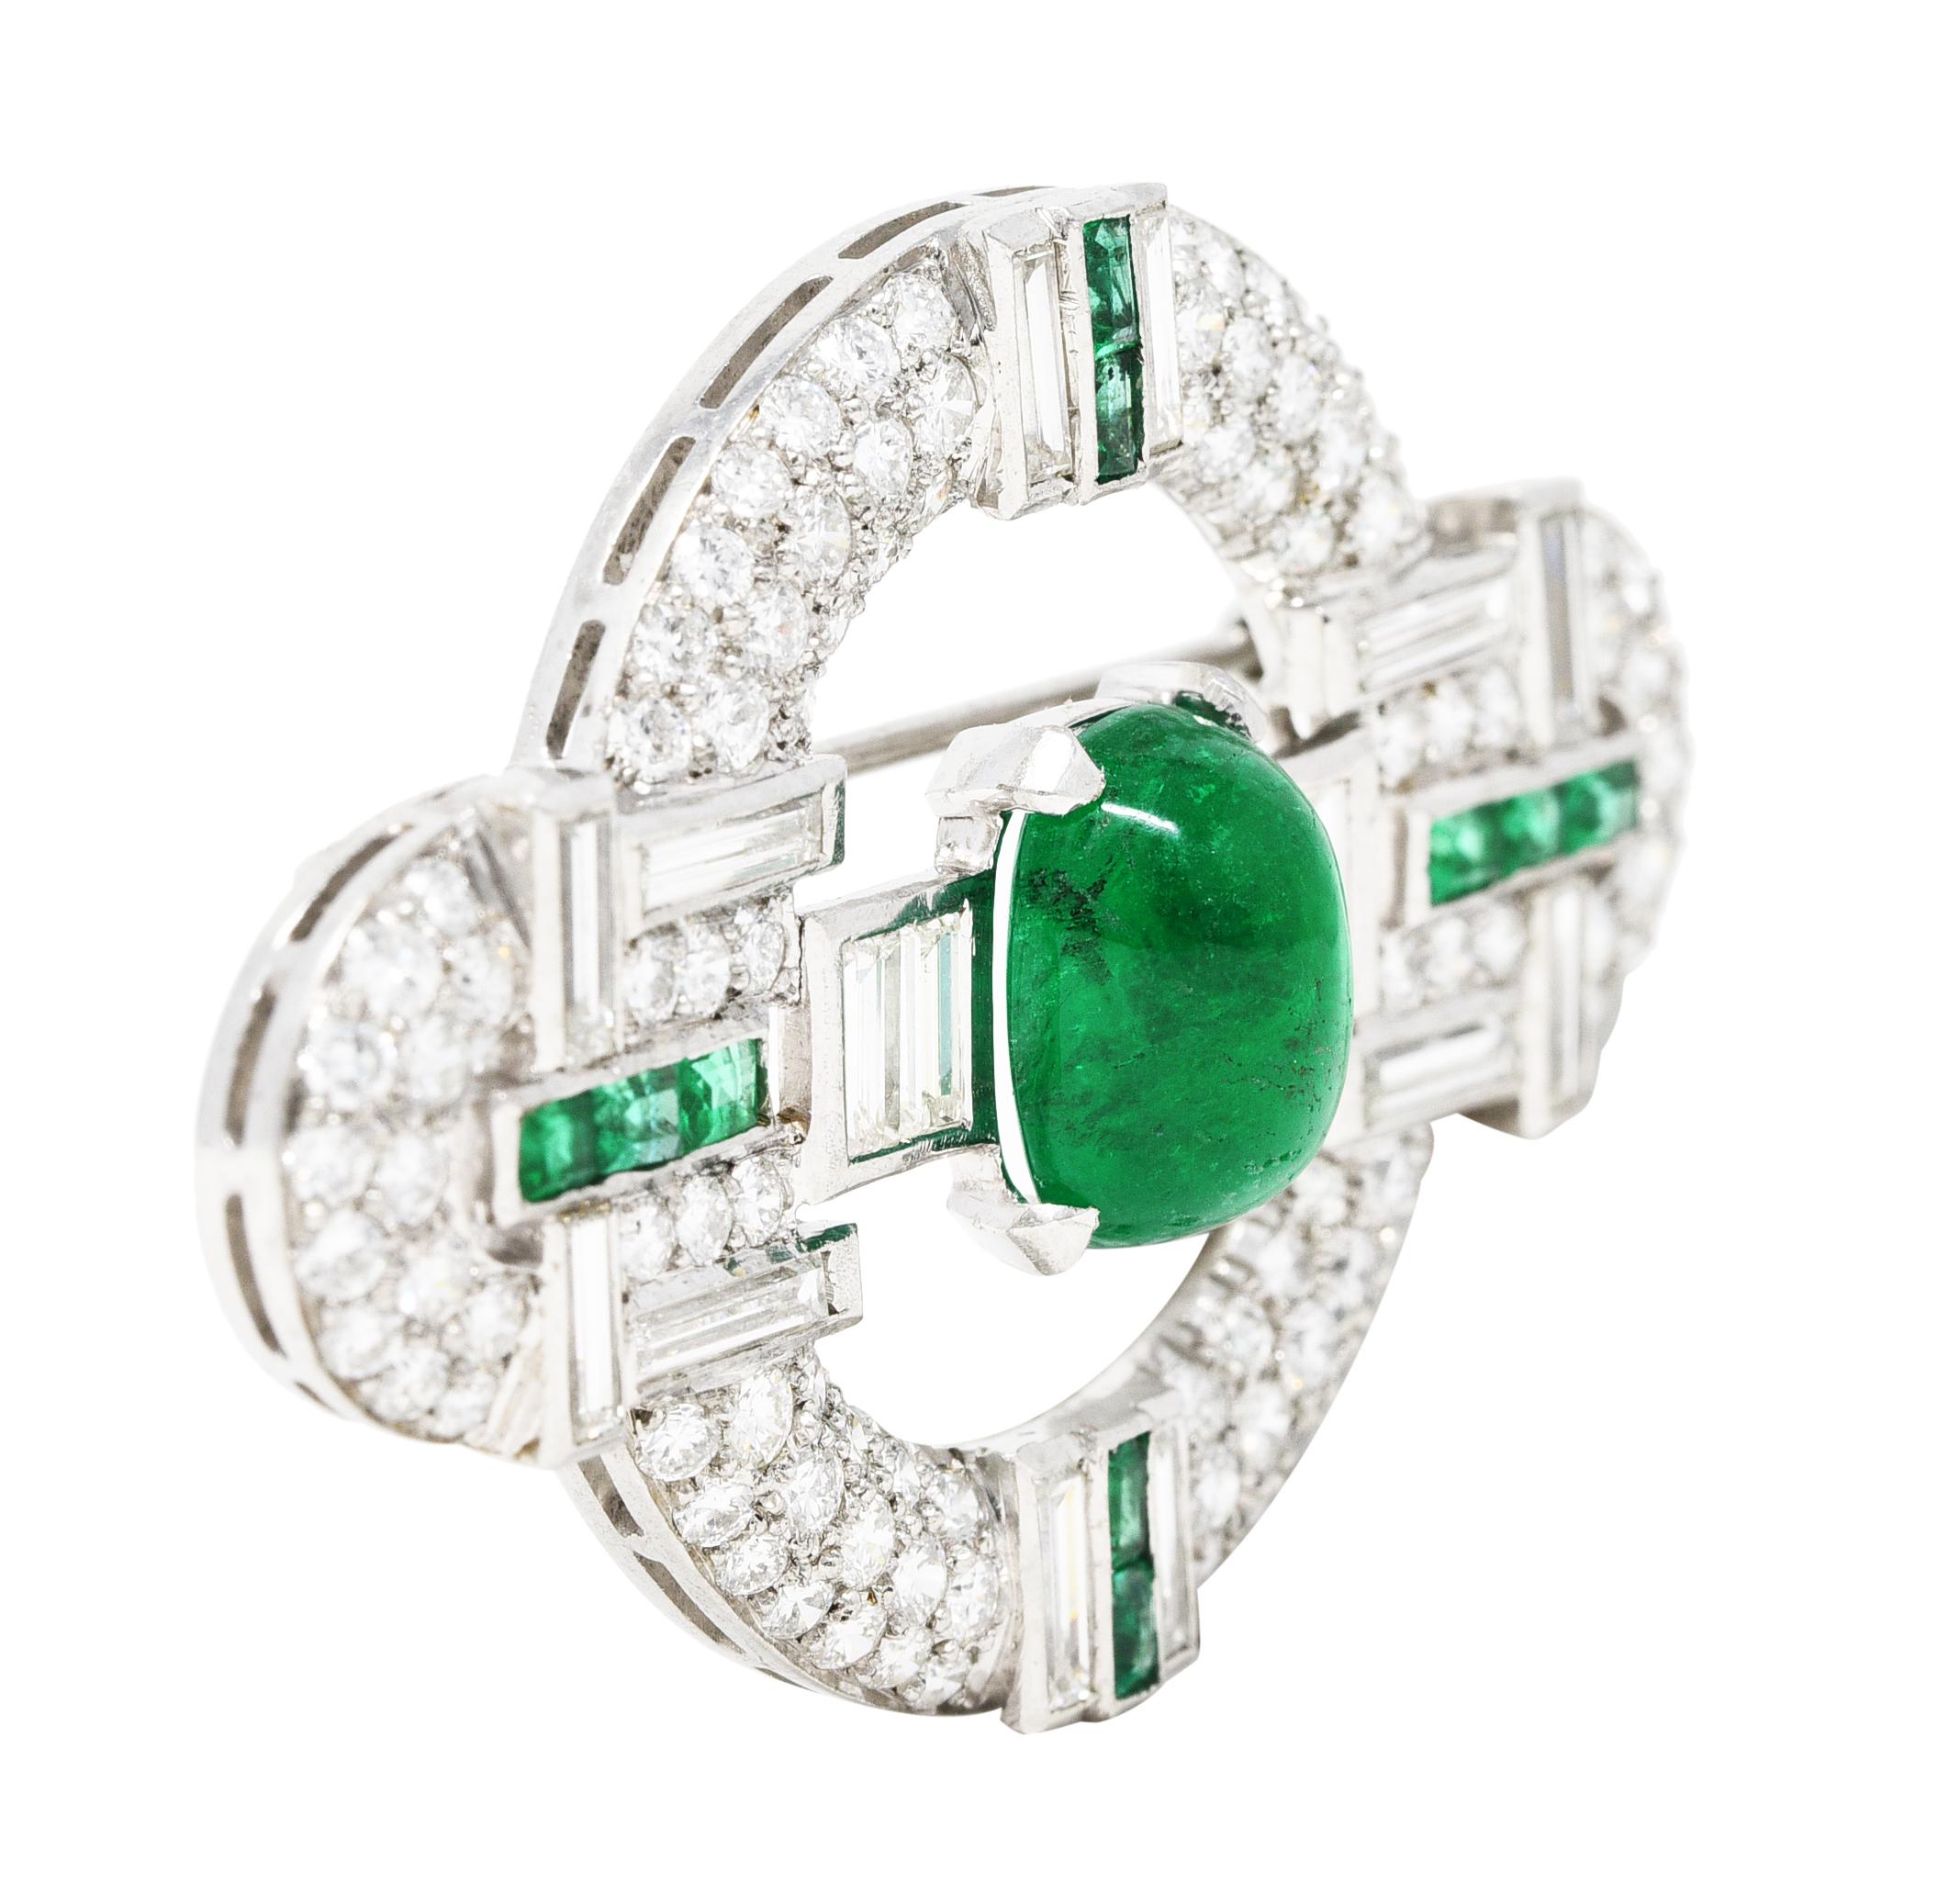 East to West brooch is comprised of a circle motif with arched terminals. Centering a cushion emerald cabochon weighing approximately 4.00 carats. Vibrantly green in color and semi-transparent with natural inclusions. With emerald accents at each